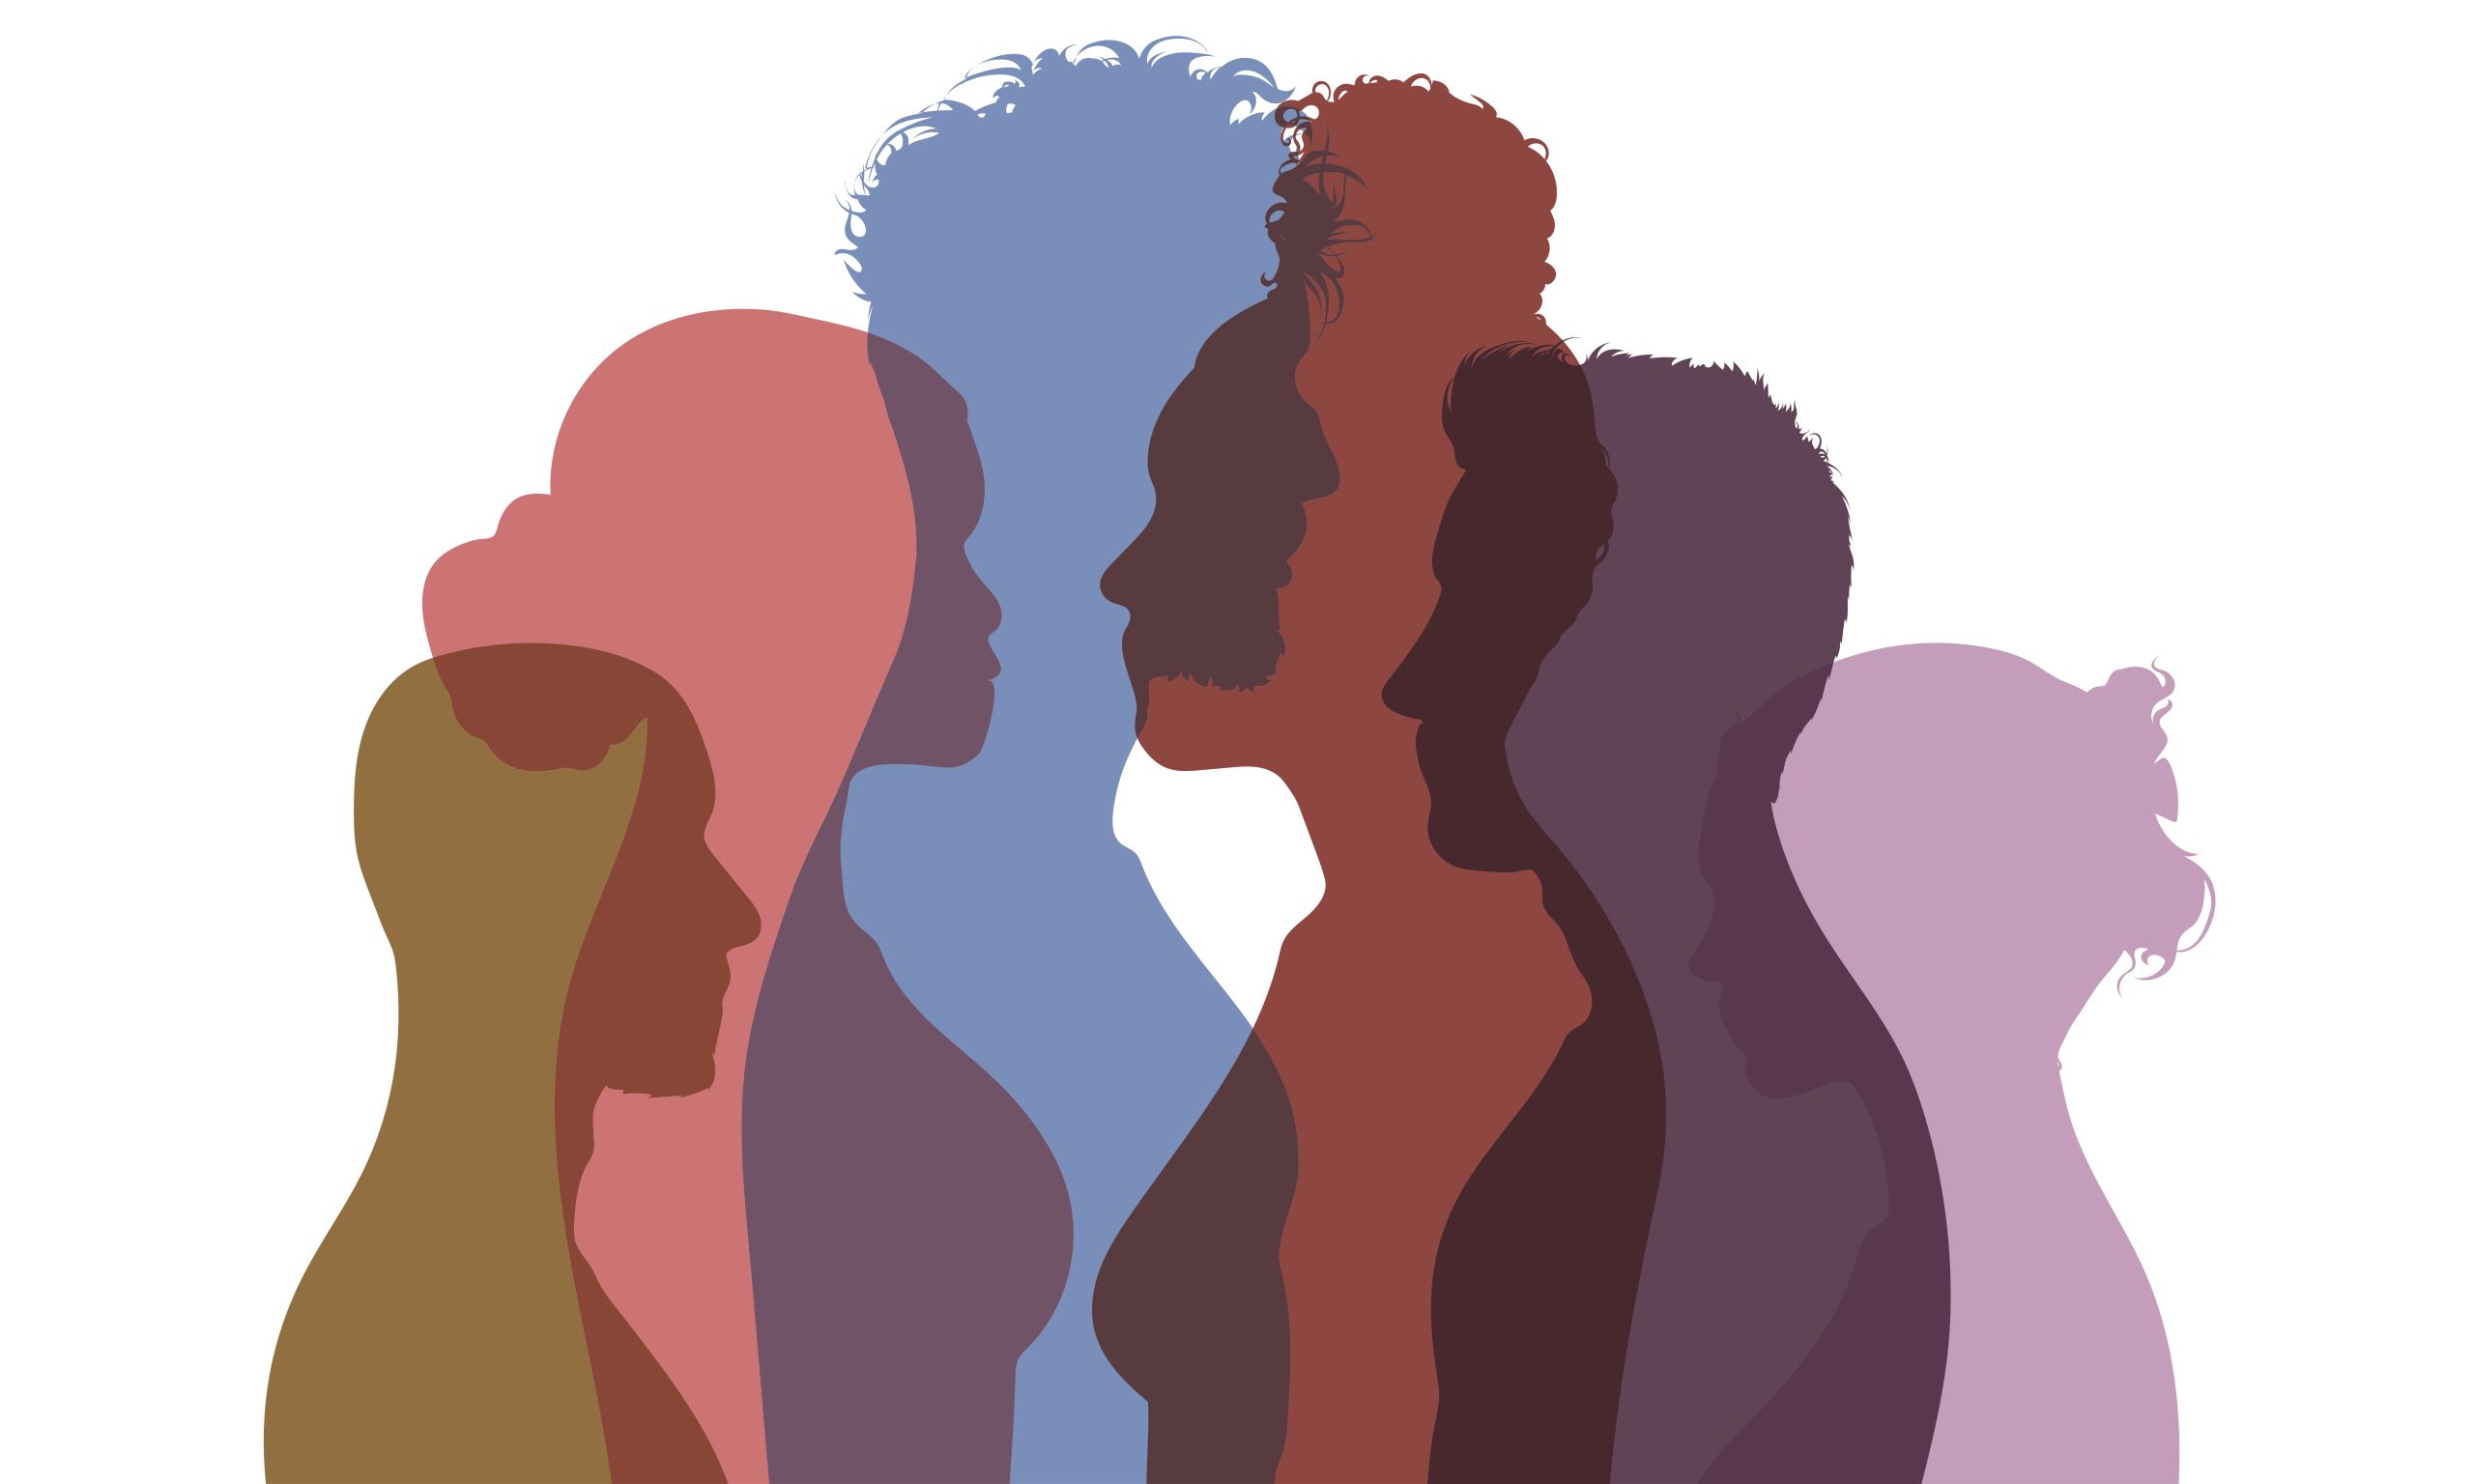 Profile silhouettes of a mult-racial group of people.